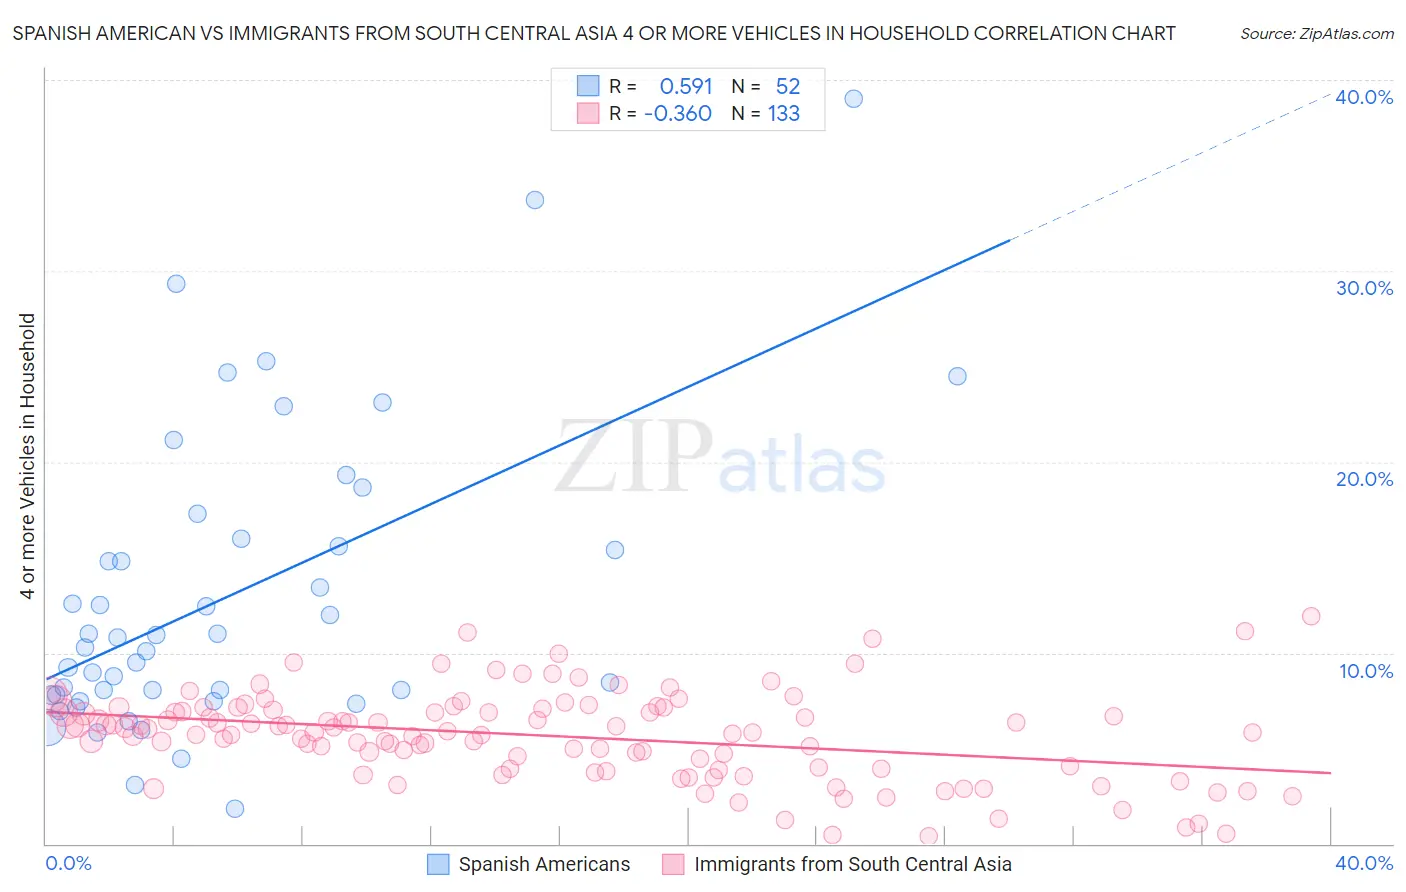 Spanish American vs Immigrants from South Central Asia 4 or more Vehicles in Household